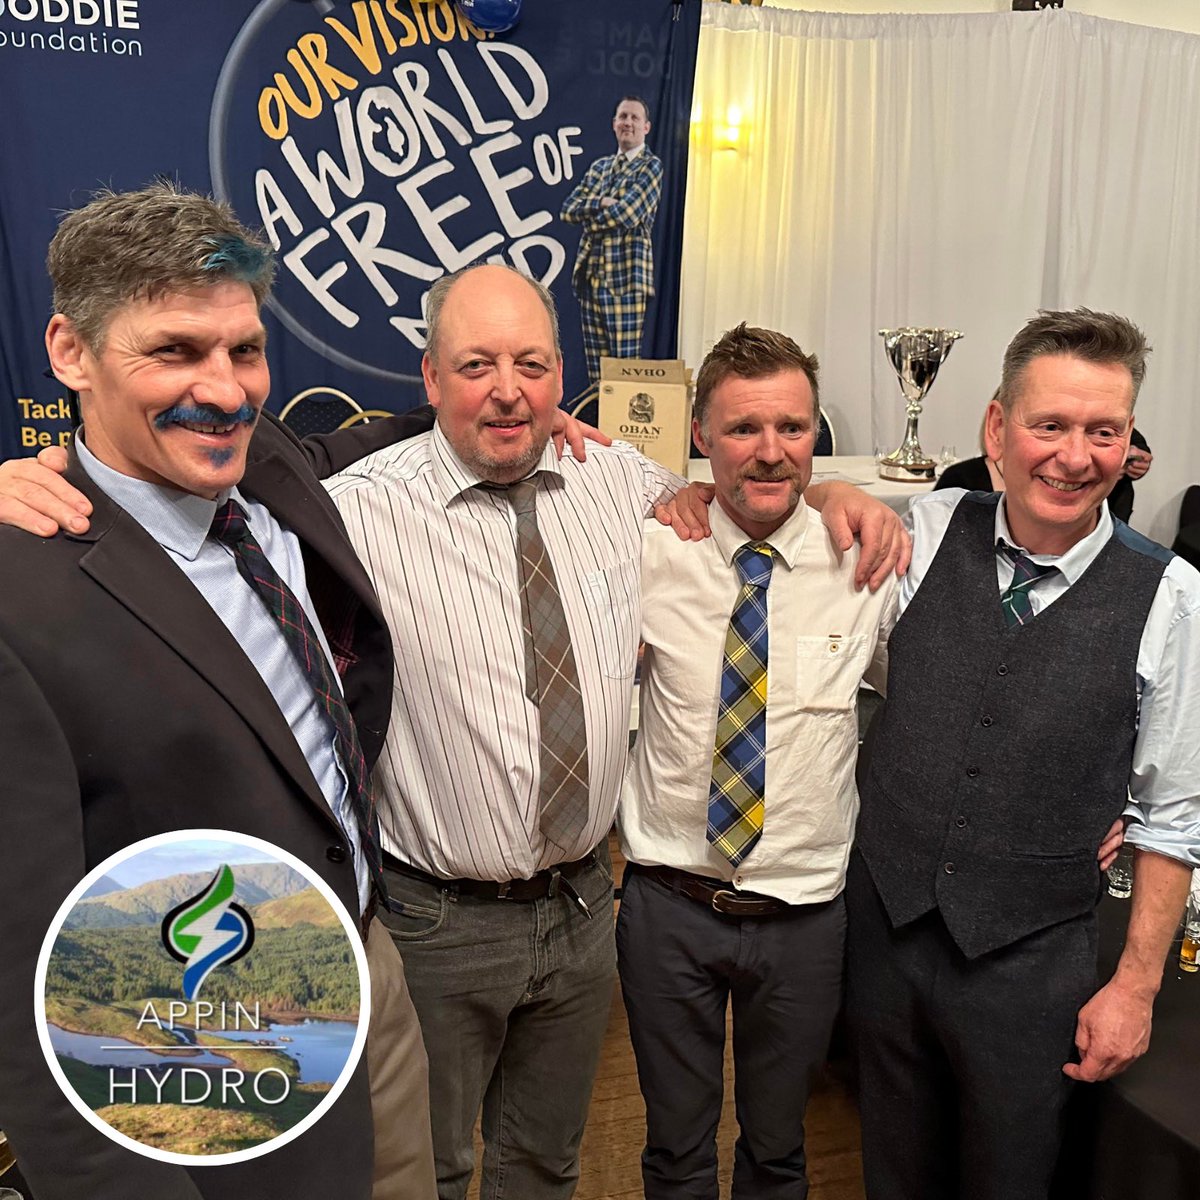 Thank you to David Colthart at Appin Hydro who donated £1 for every mile Rob’s team cycled from Oban to Rome - that’s £1812! David met some of the team at @ObanLorneRFC’s fundraising dinner and wanted to support his fellow Argyll farmers and volunteer firefighters! 💙💛